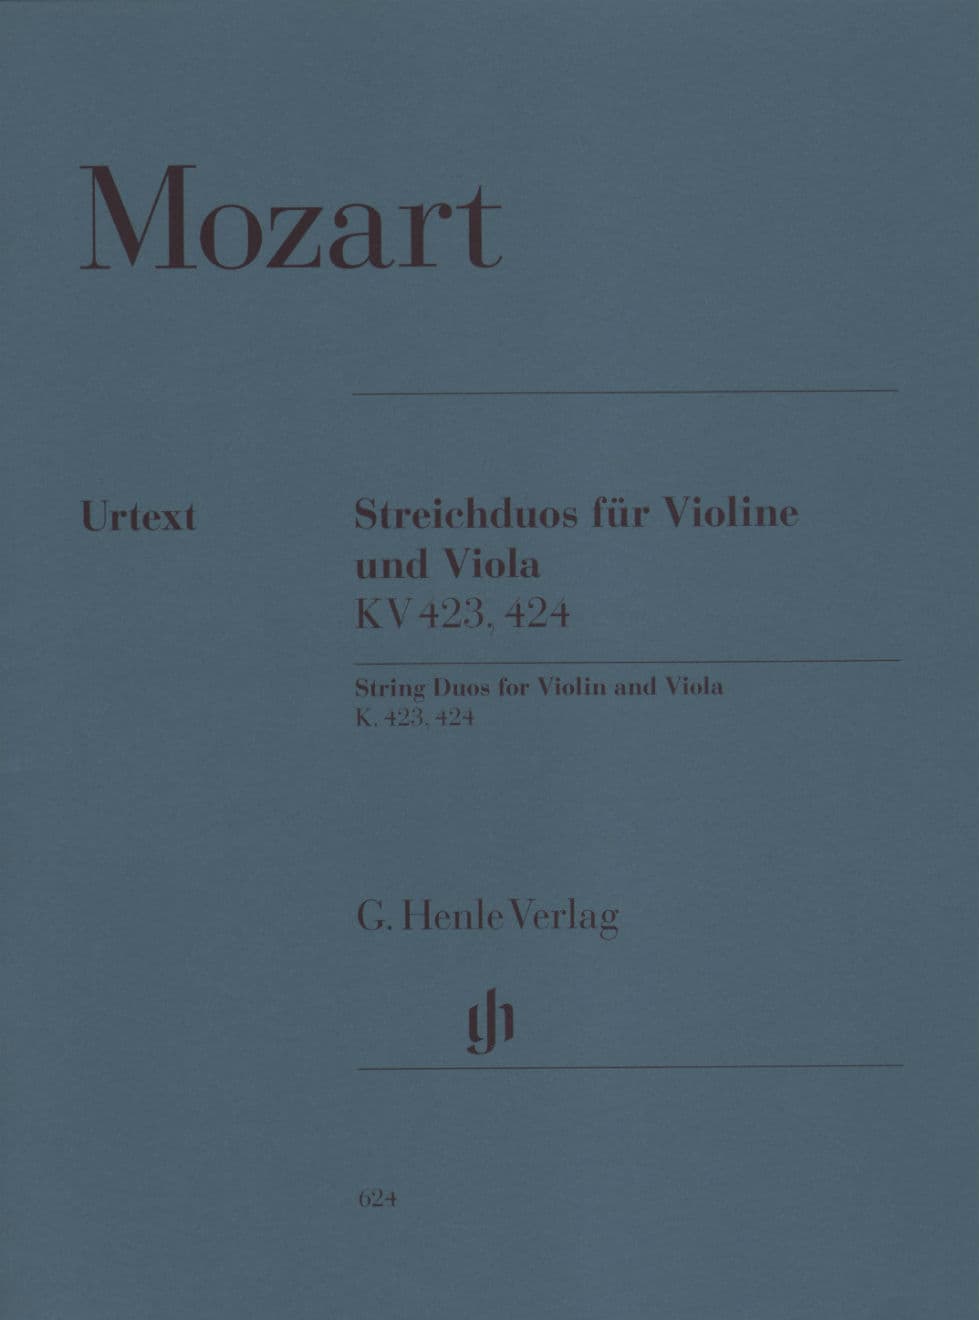 Mozart, WA - String Duos, K 423 and 424 - Violin and Viola - edited by Anja Bensieck - G Henle Verlag URTEXT